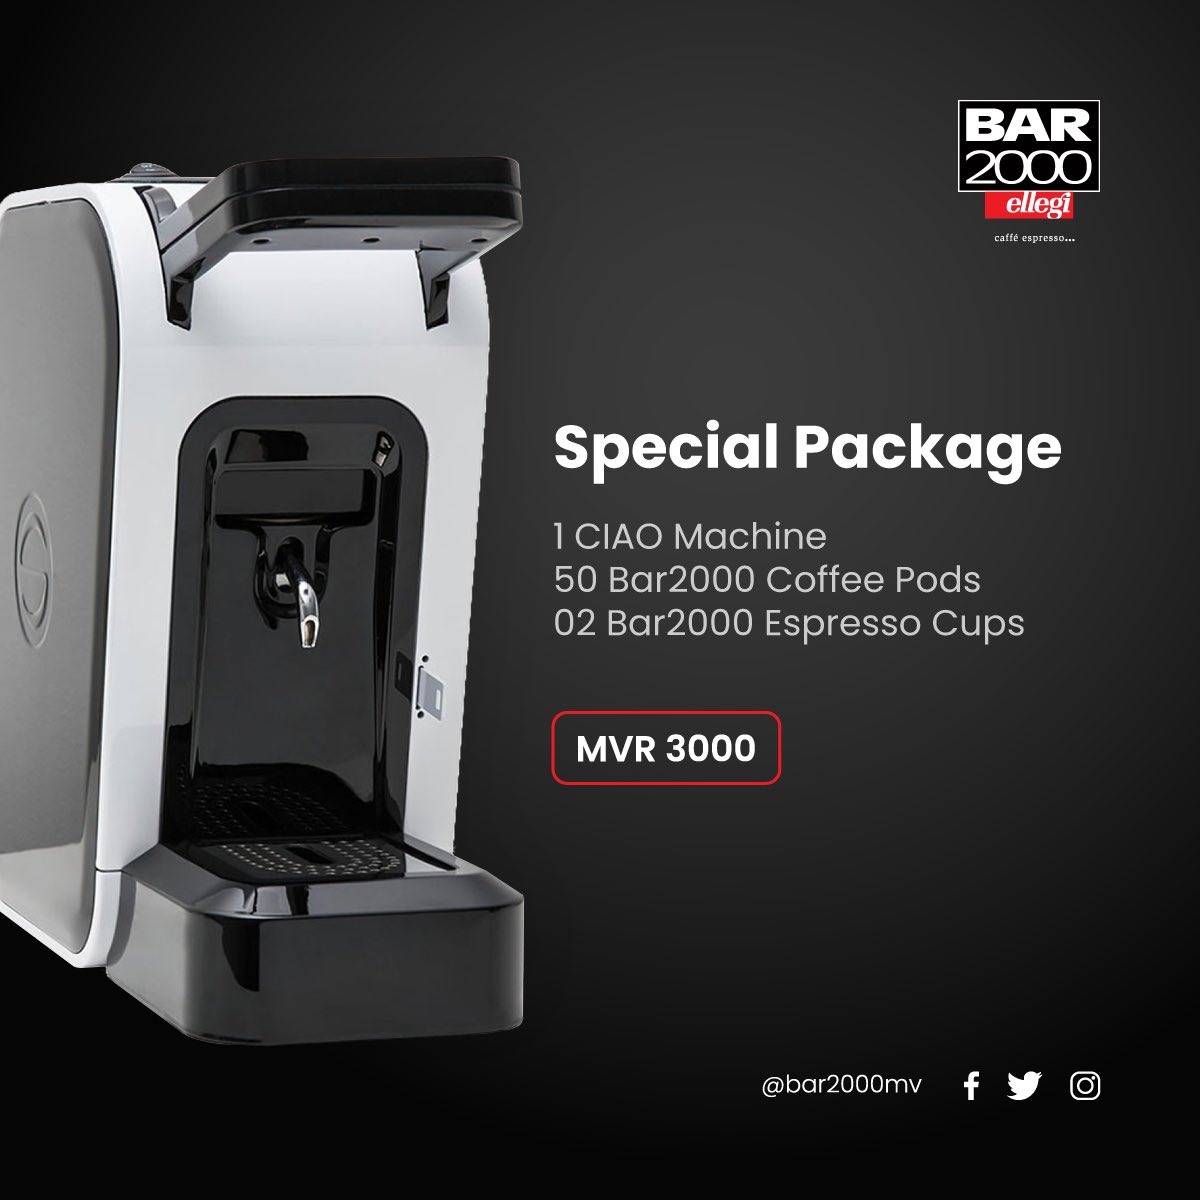 BAR2000 on X: The CIAO Machine - a real jewel of Italian technology. Brand  new small pod machine with an innovative & appealing design, ideal for  #homeuse and at your #workplace. #ciaocoffeemachine #